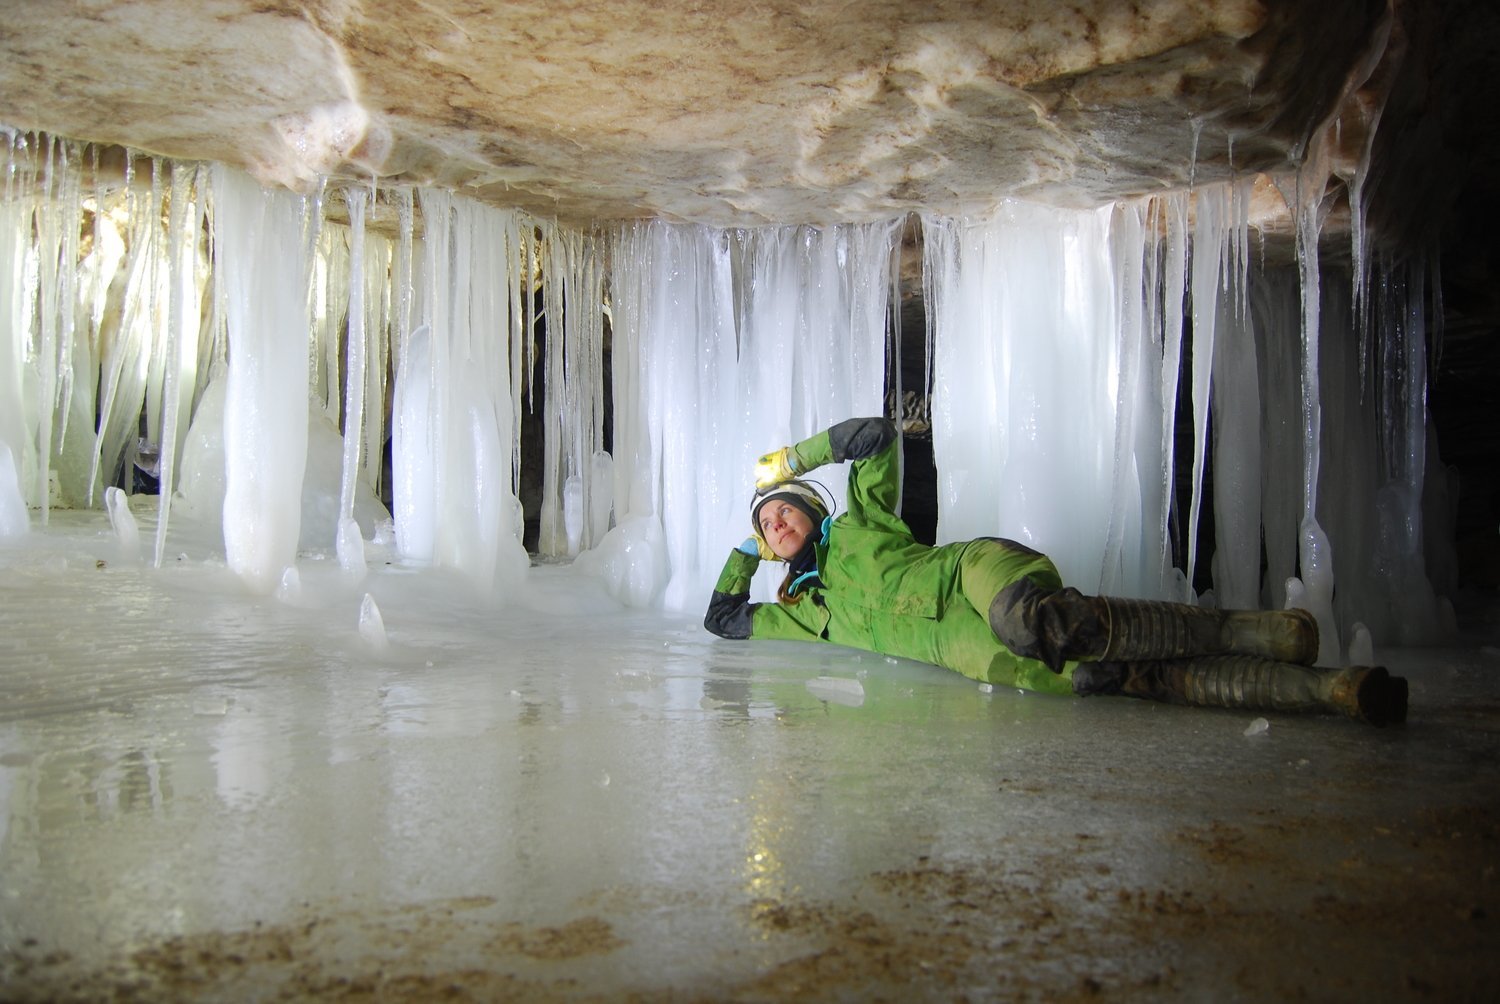 <span style="font-weight: bold;">Ice Caves of Pinega</span><br>